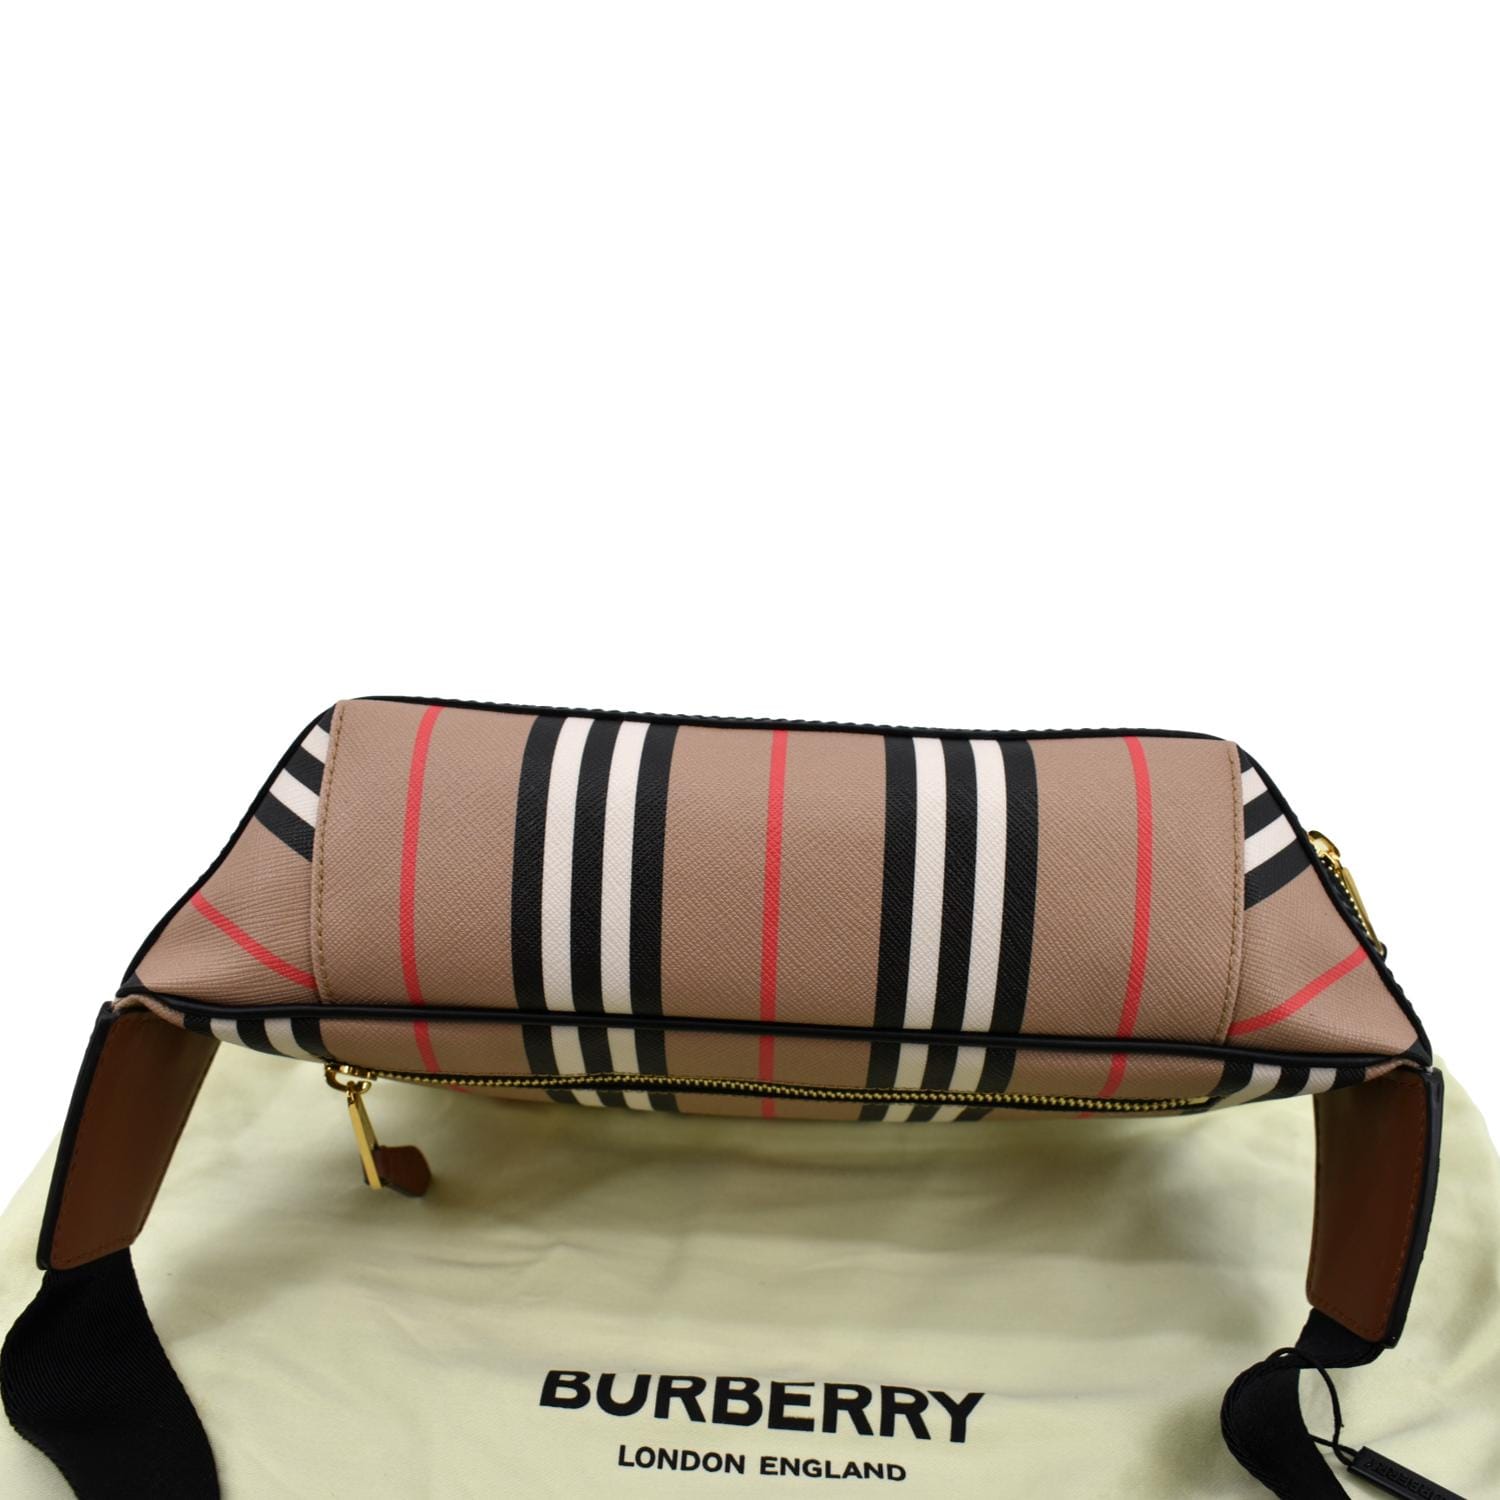 LUXURY BUMBAGS ARE THEY WORTH IT? *Louis Vuitton vs. Burberry